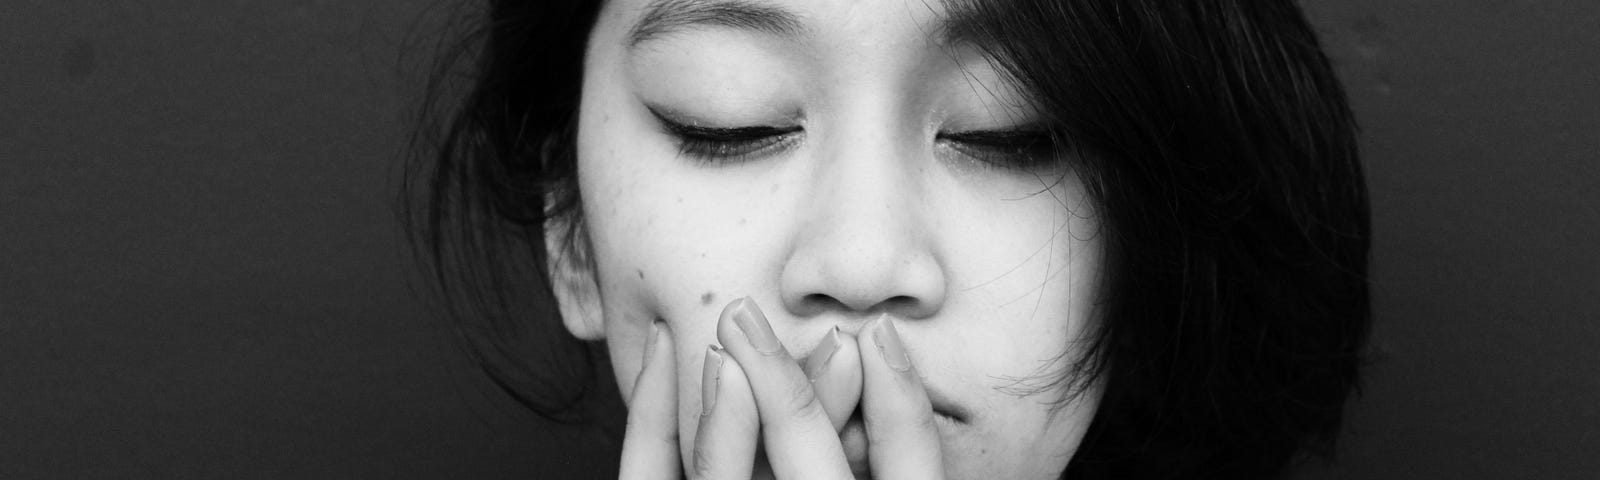 asian woman with her eyes clothes and hands over her mouth looking disappointed in black and white.